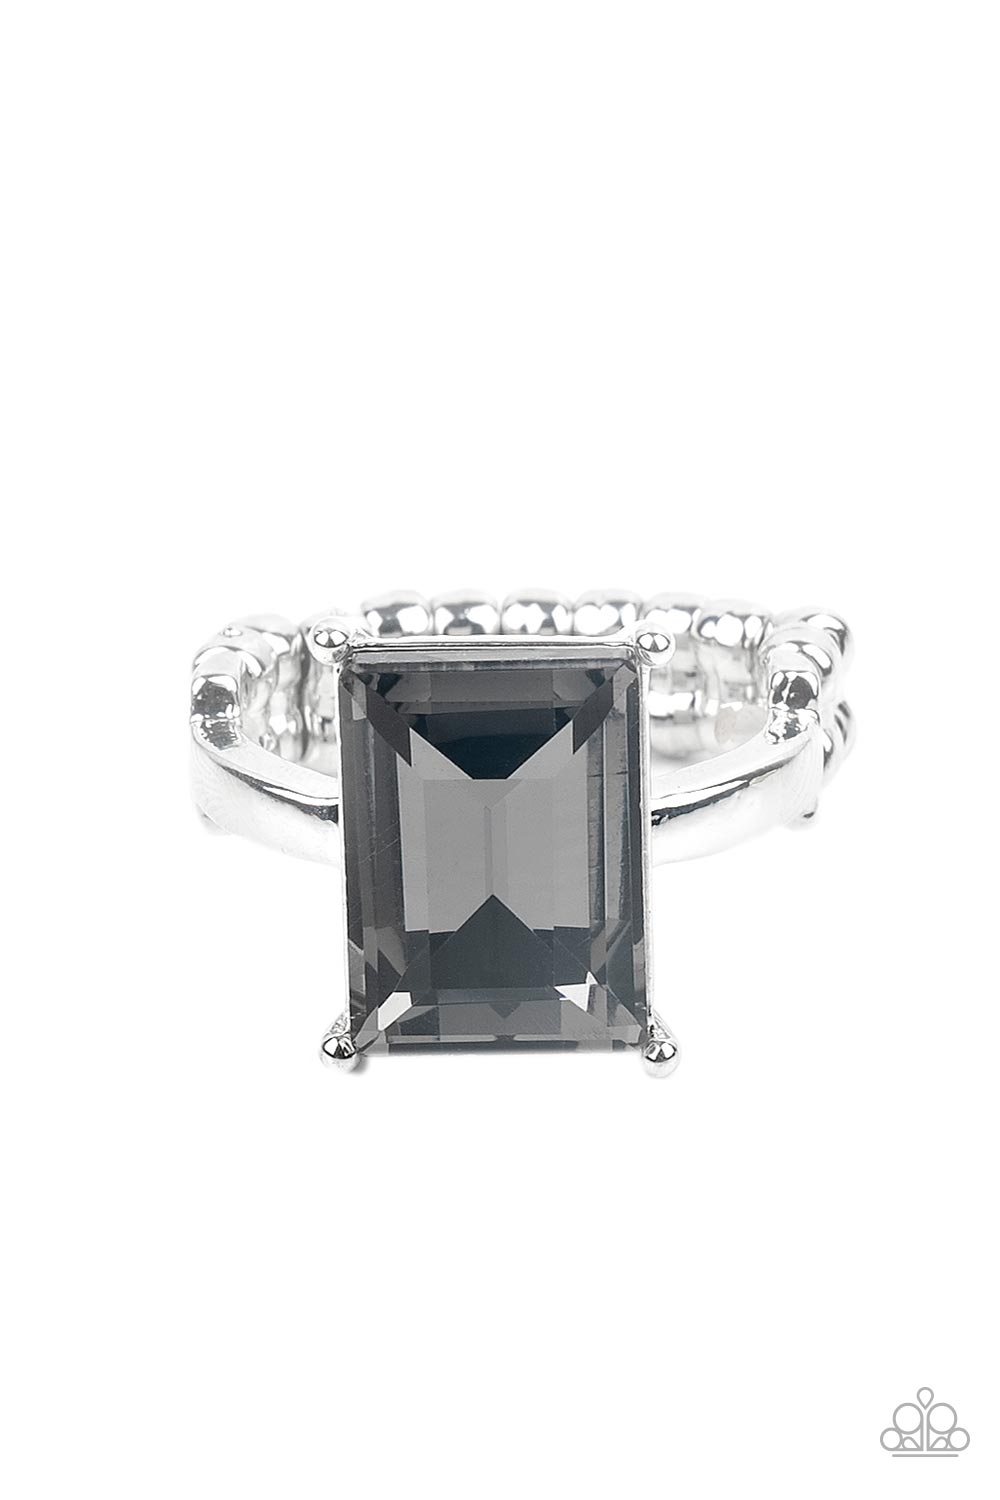 Social Glow Silver Ring - Paparazzi Accessories  A smoky emerald cut gem is nestled inside a pronged silver frame atop a dainty silver band, creating a sparkly statement atop the finger. Features a dainty stretchy band for a flexible fit.  All Paparazzi Accessories are lead free and nickel free!  Sold as one individual ring.